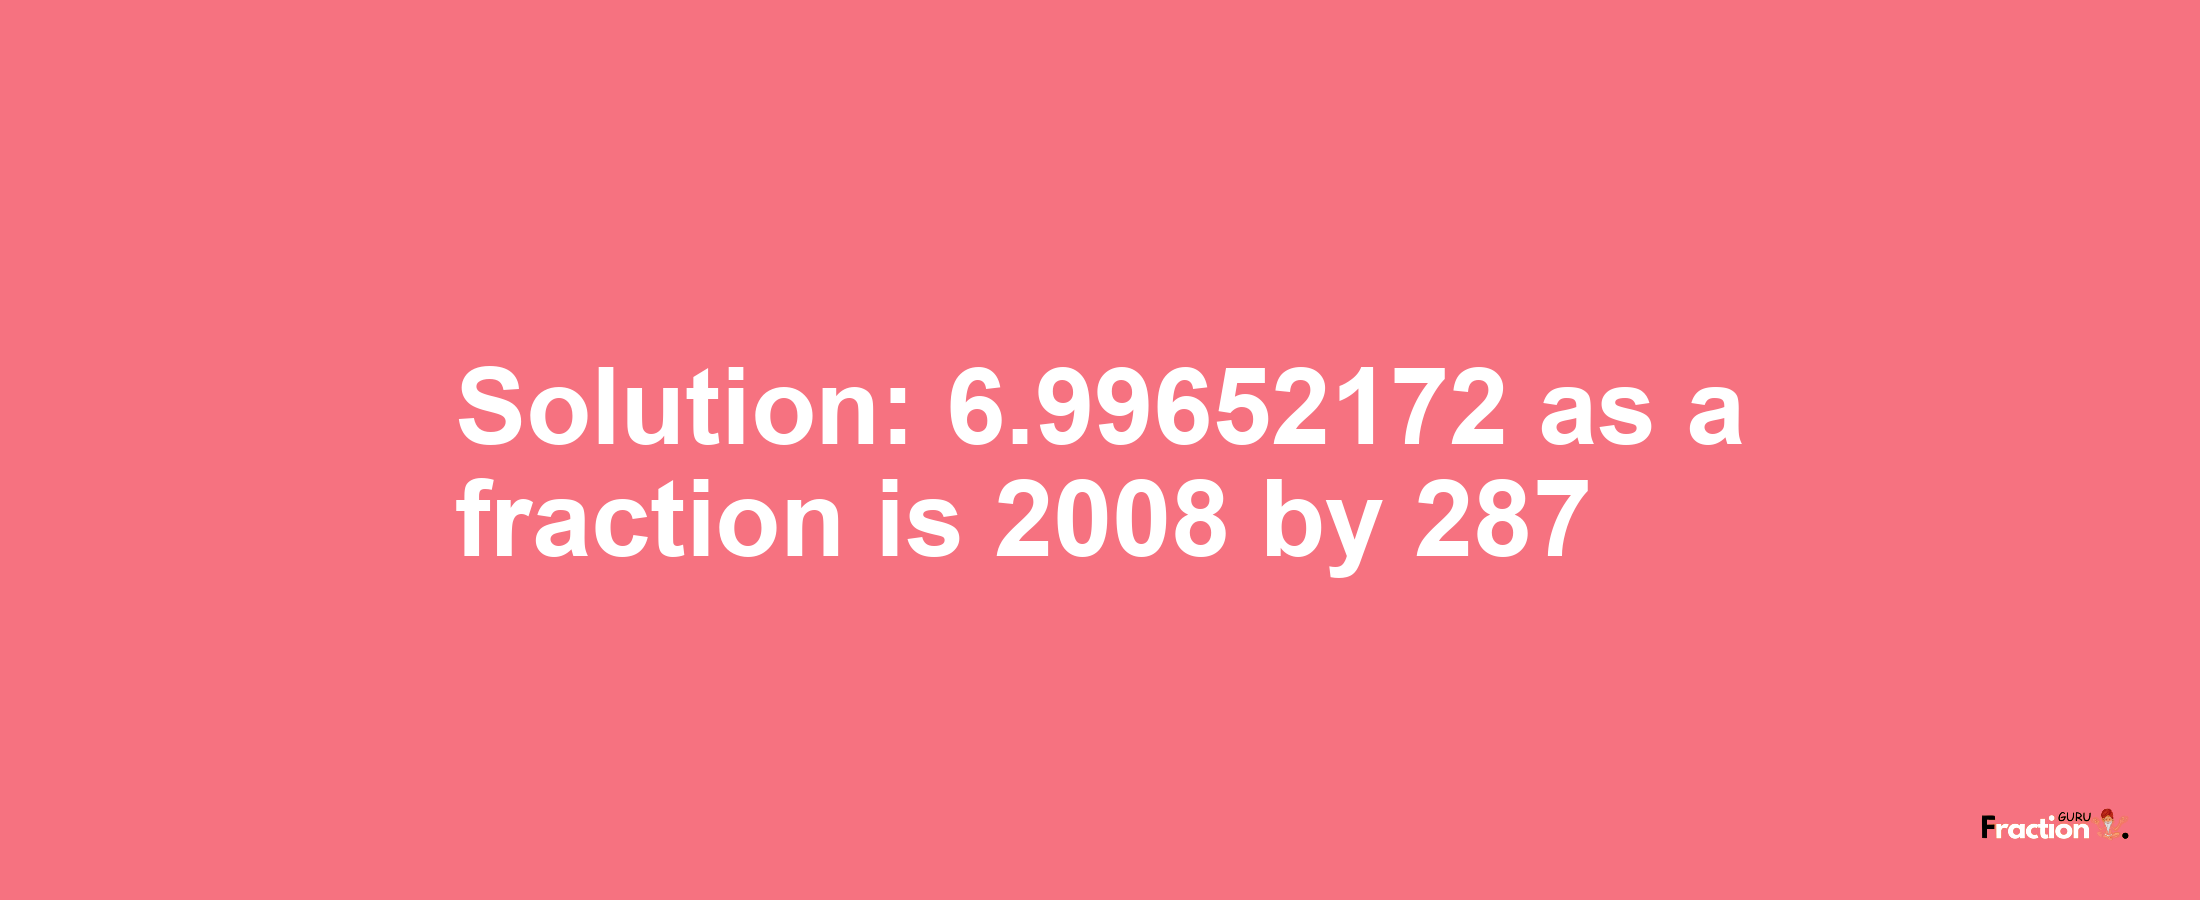 Solution:6.99652172 as a fraction is 2008/287